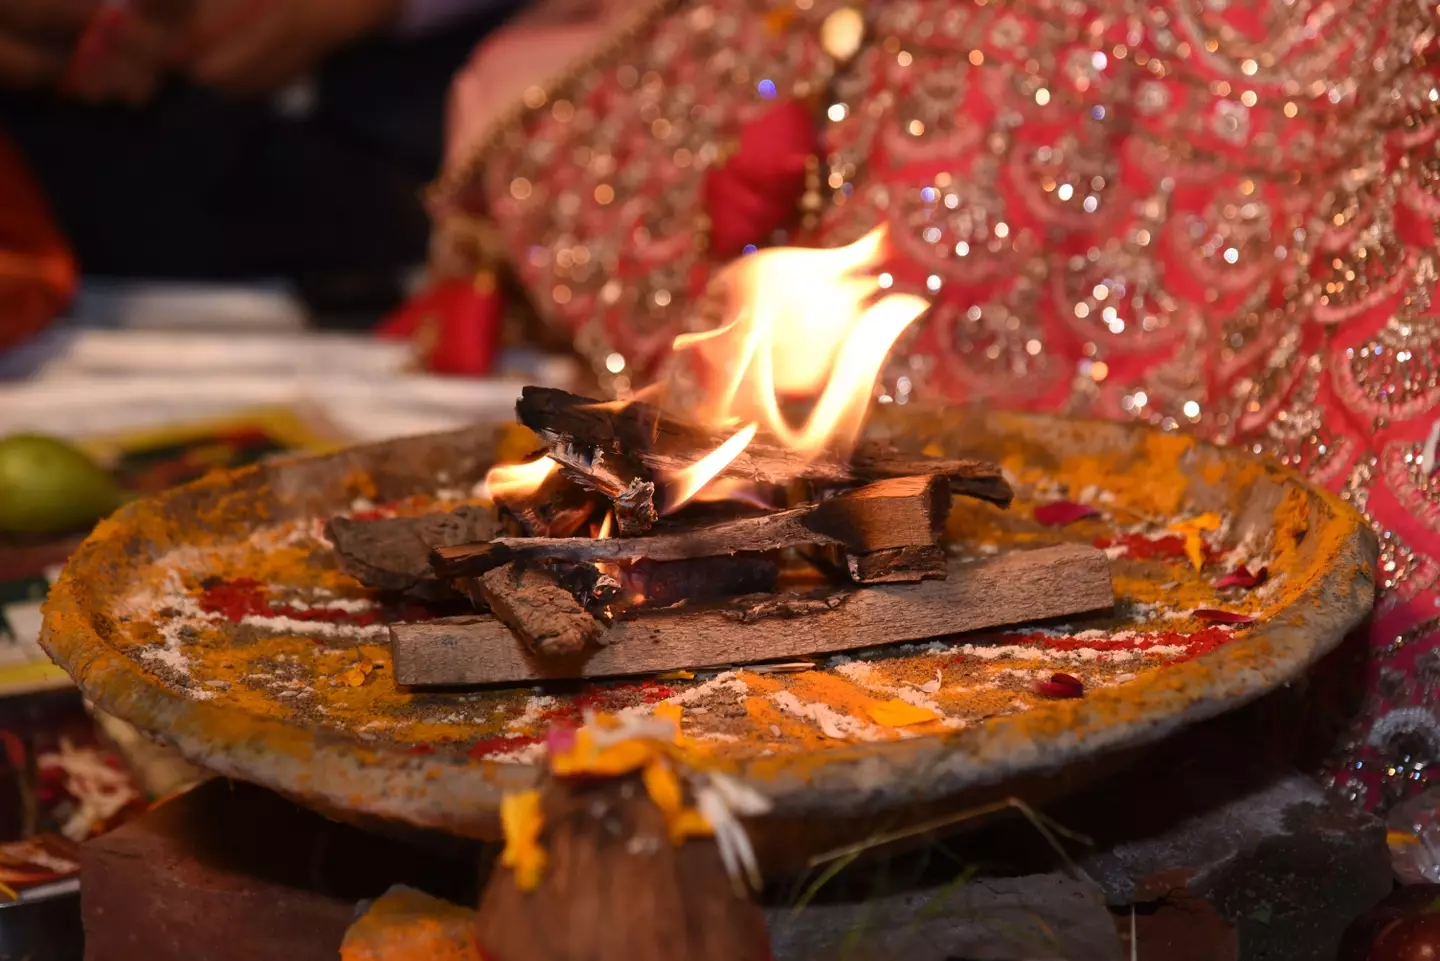 The wedding pheras are a traditional part of Hindu weddings.